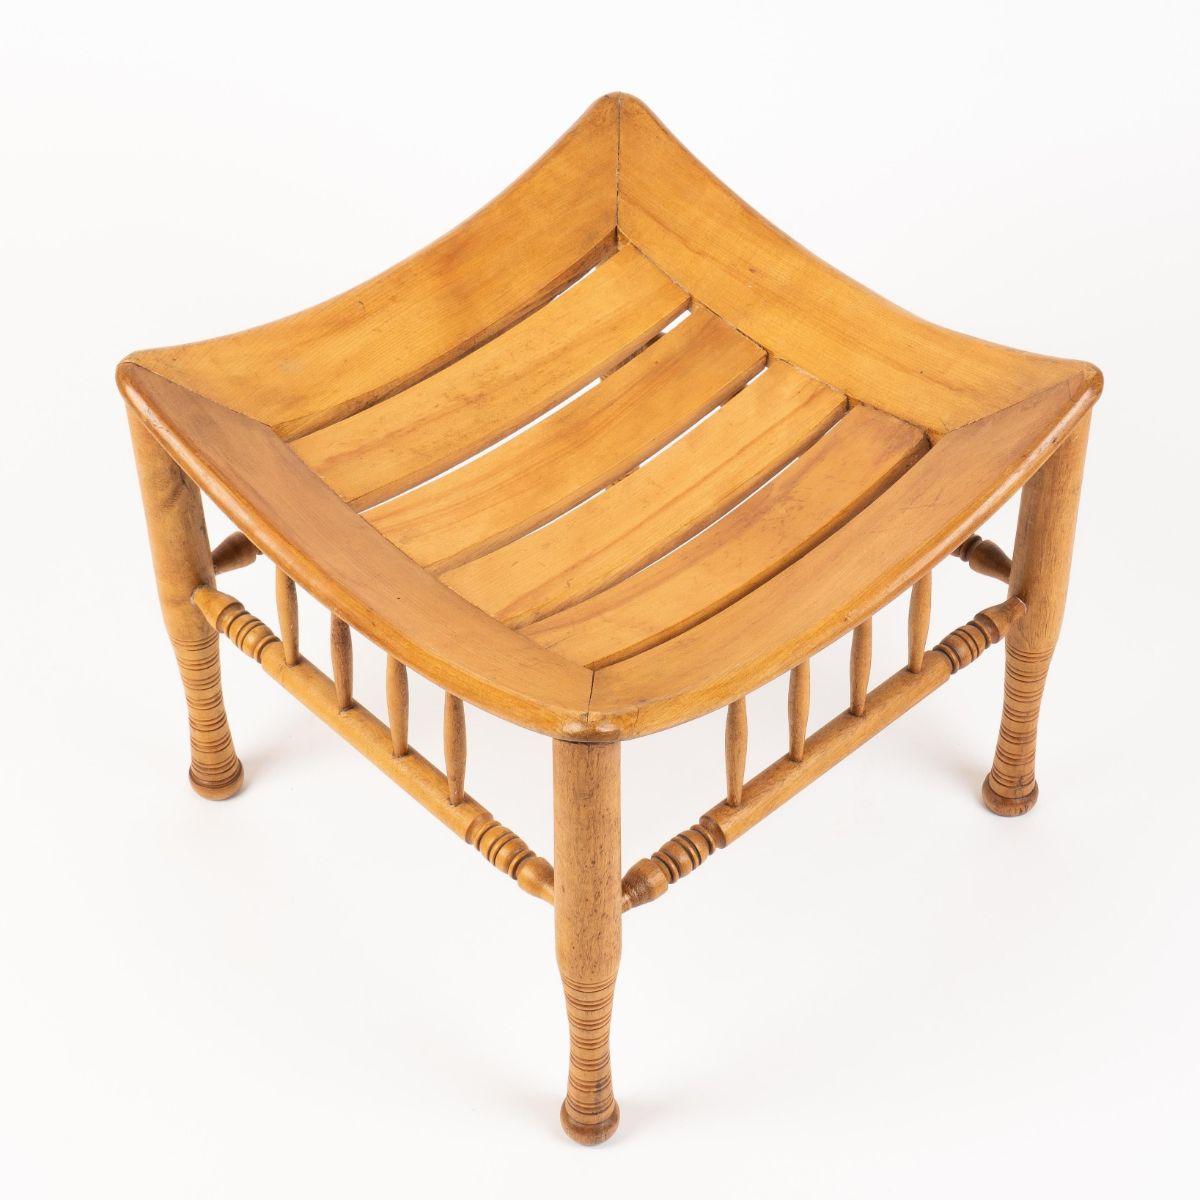 Egyptian Revival “Thebes” style stool in naturally finished birch wood, after an archeological model. The four turned legs are joined by a medial boxed stretcher each with three turned vertical braces to the cupped, frame, and slated